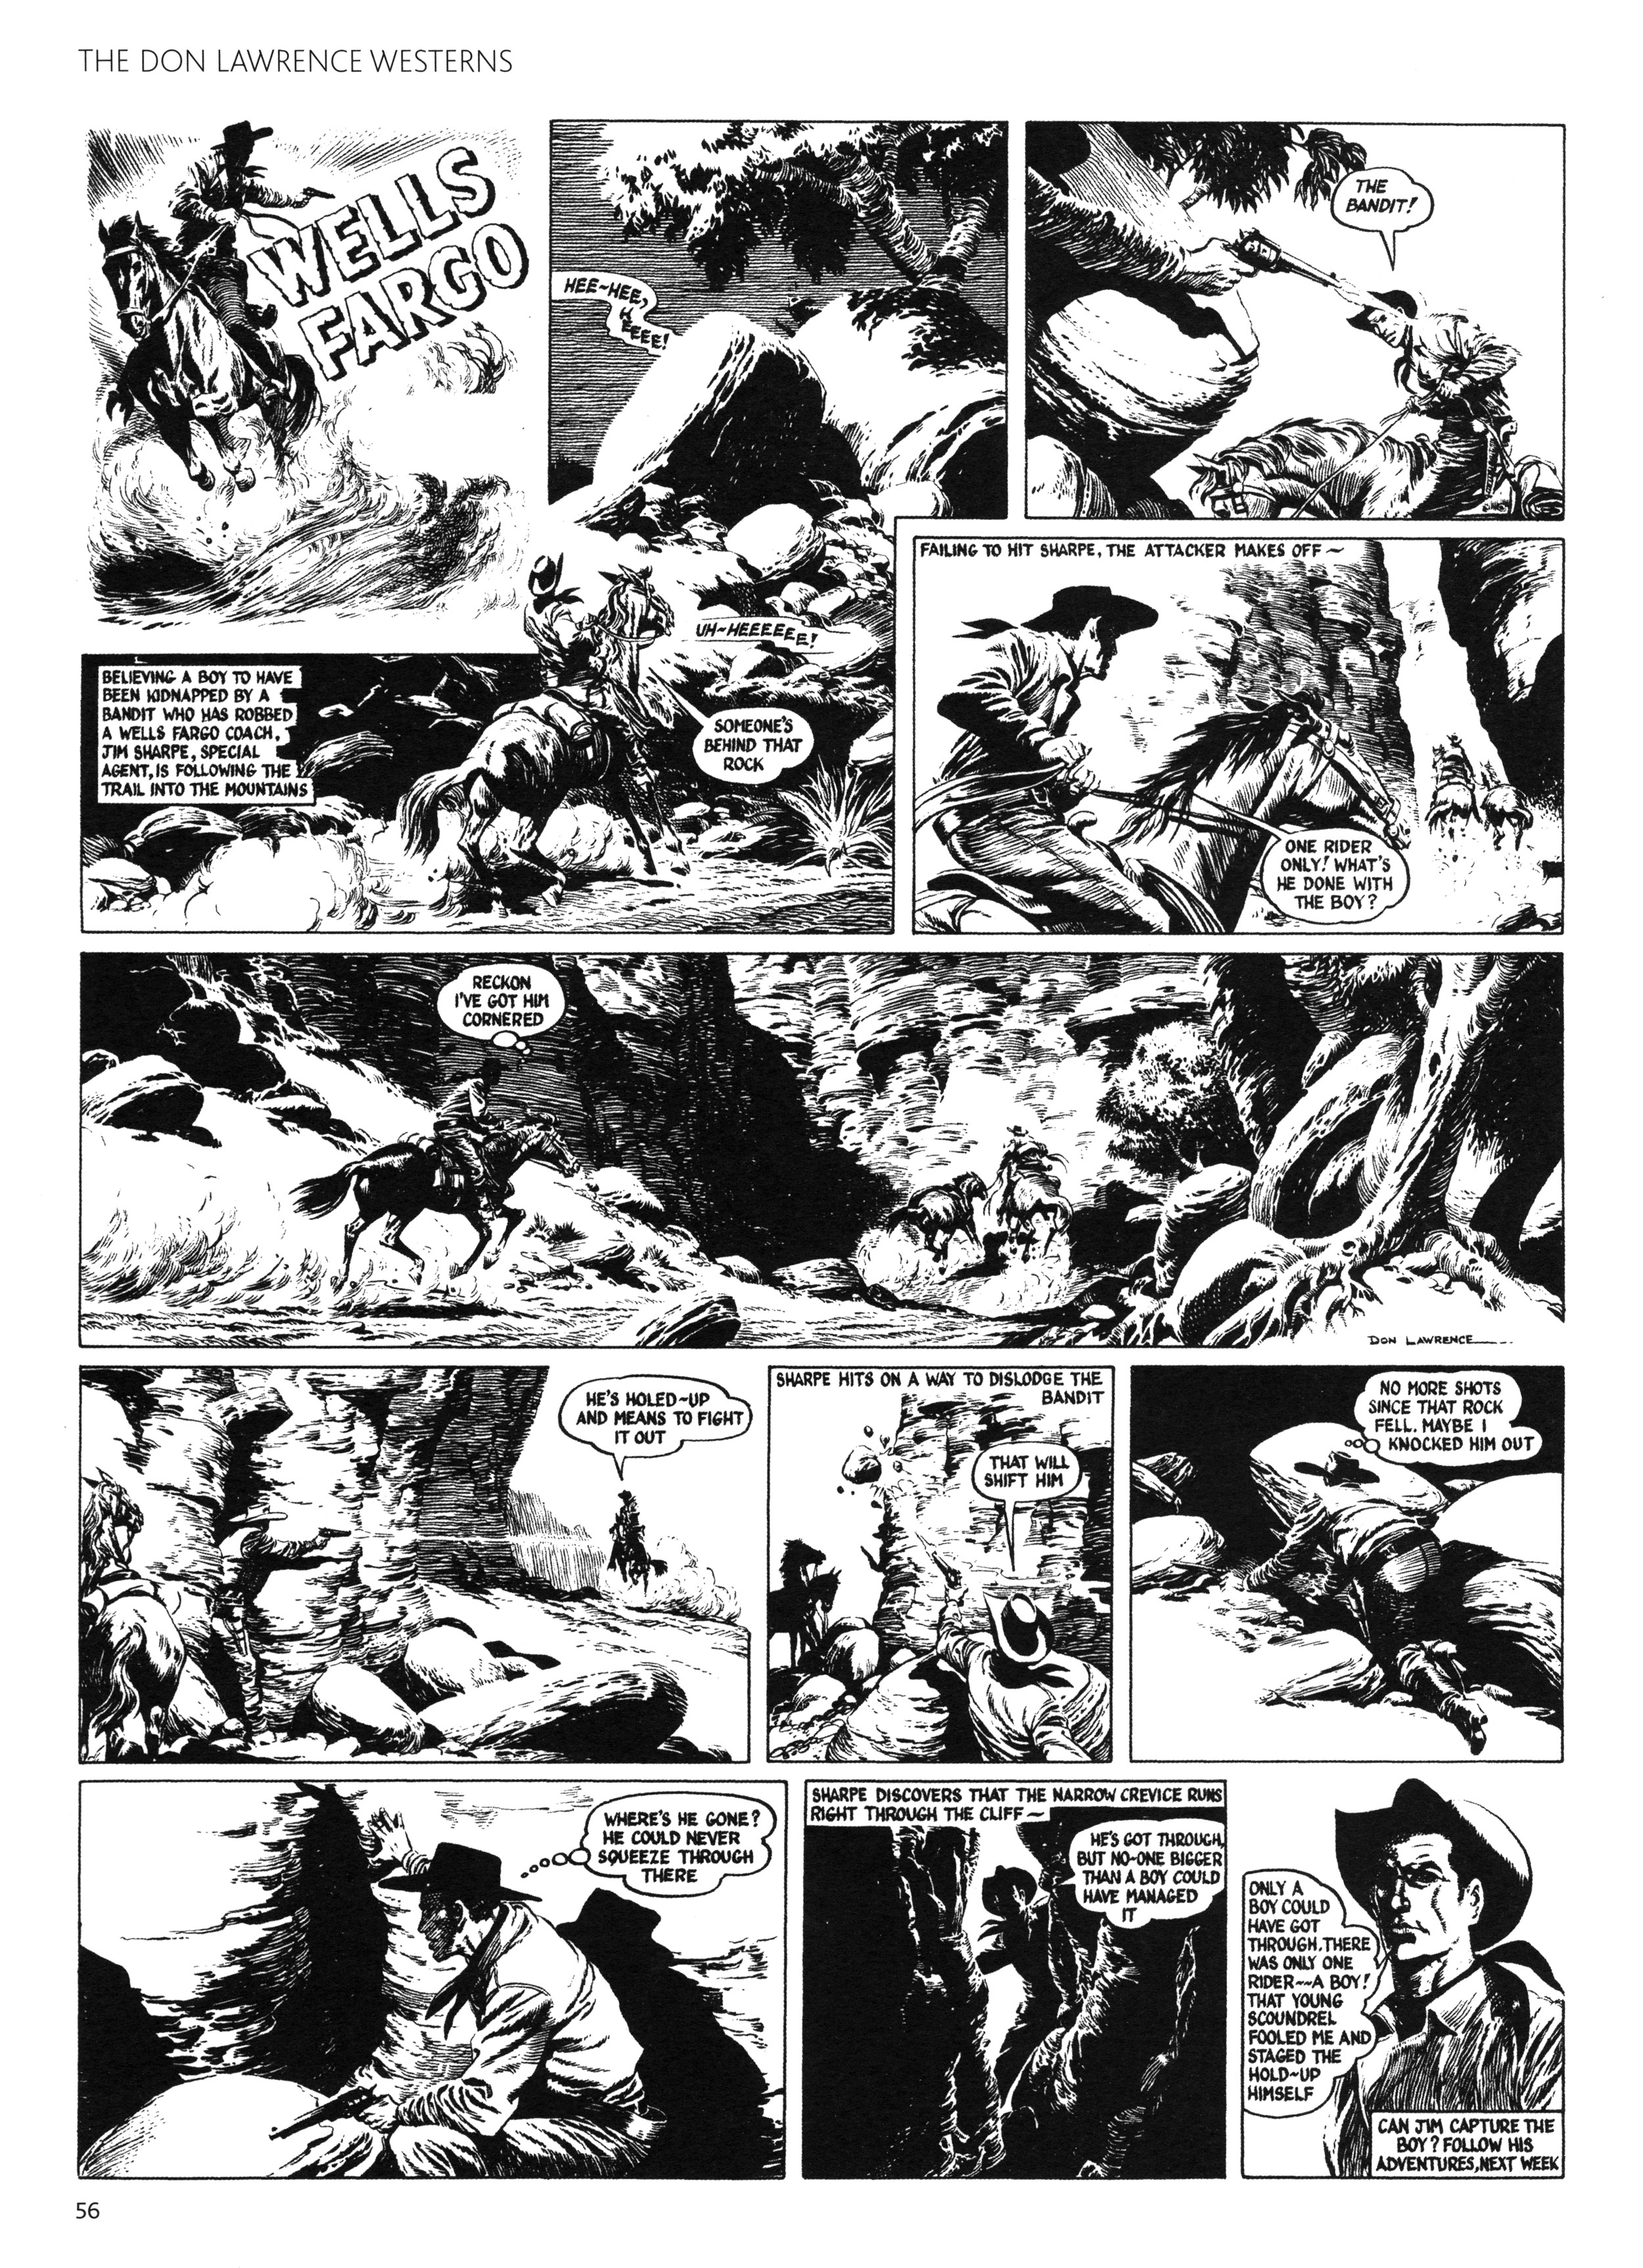 Read online Don Lawrence Westerns comic -  Issue # TPB (Part 1) - 60